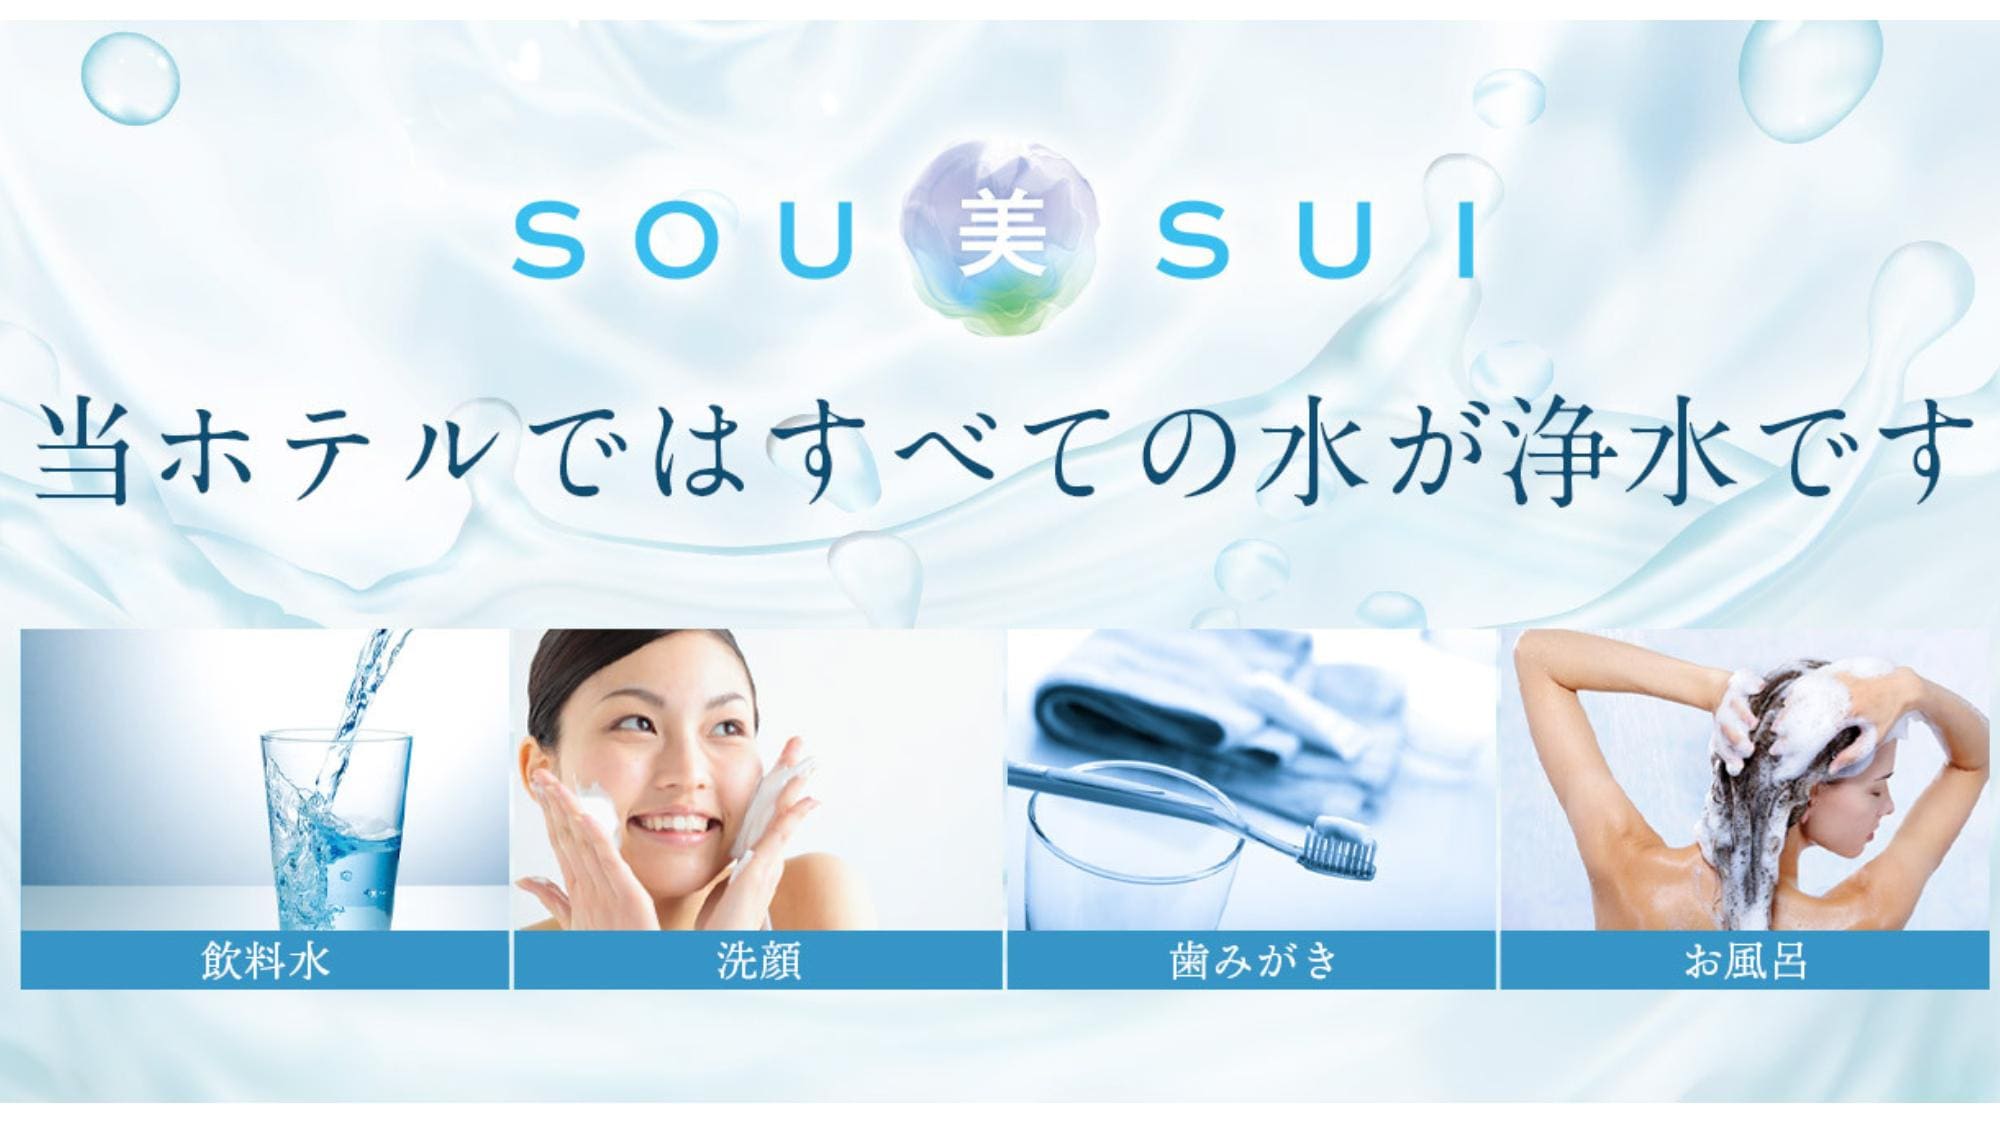 ・[SOU beauty SUI] Experience water that is good for your body in your room